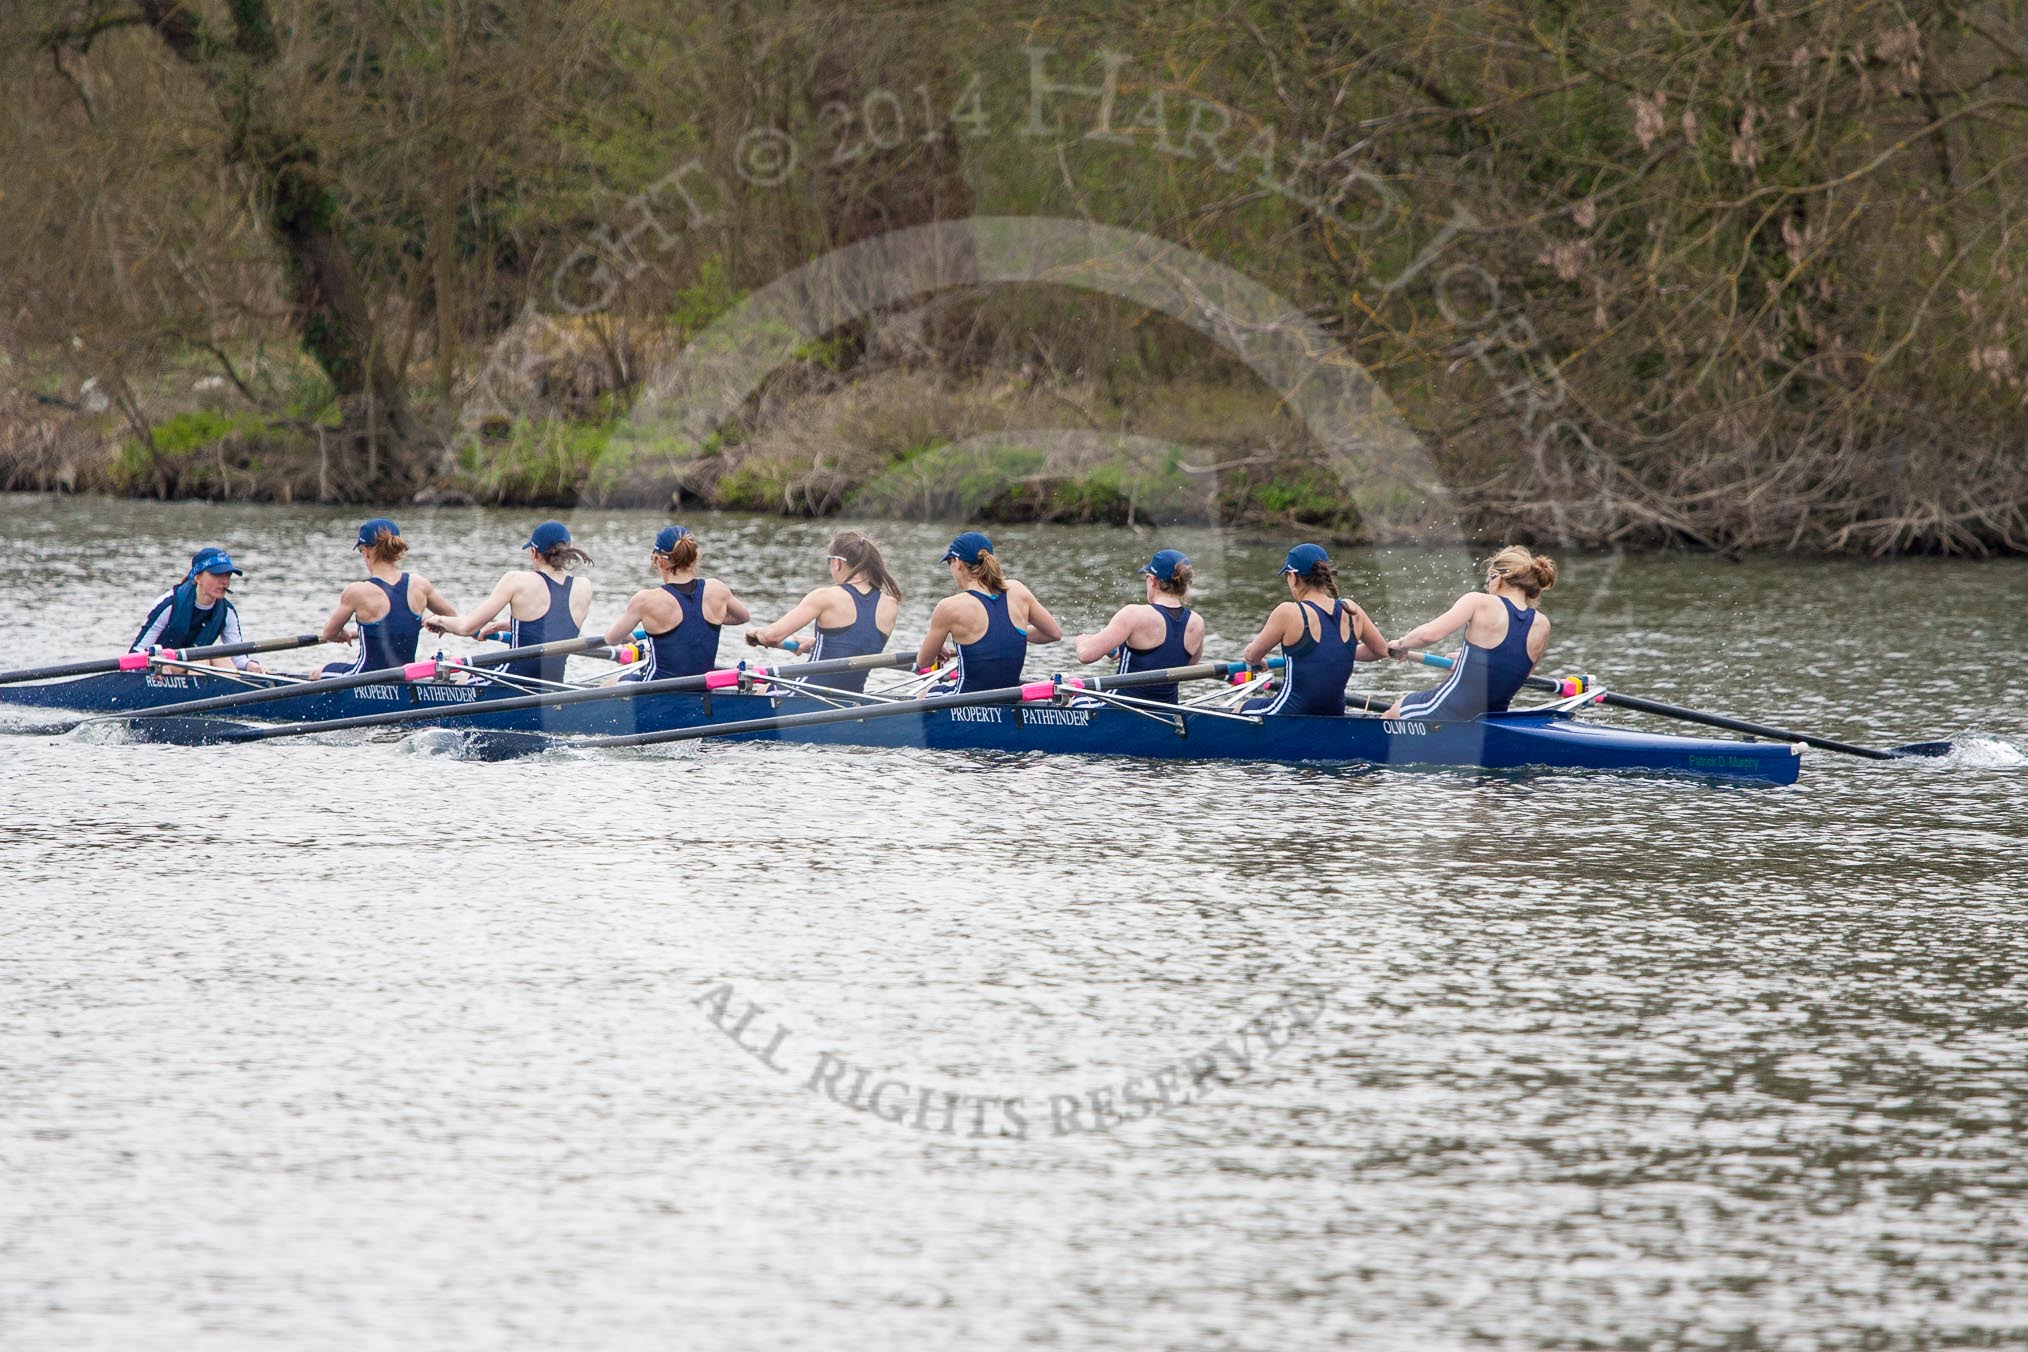 The Women's Boat Race and Henley Boat Races 2014: The Lightweight Women's Boat Race - OUWLRC in the lead: Bow Sophie Tomlinson, 2 Kirstin Rilham, 3 Rebecca Lane, 4 Nicky Huskens, 5 Sophie Philbrick, 6 Zoe Cooper-Sutton, 7 Emma Clifton, stroke  Suzanne Cole, cox  Lea Carrot..
River Thames,
Henley-on-Thames,
Buckinghamshire,
United Kingdom,
on 30 March 2014 at 14:48, image #225